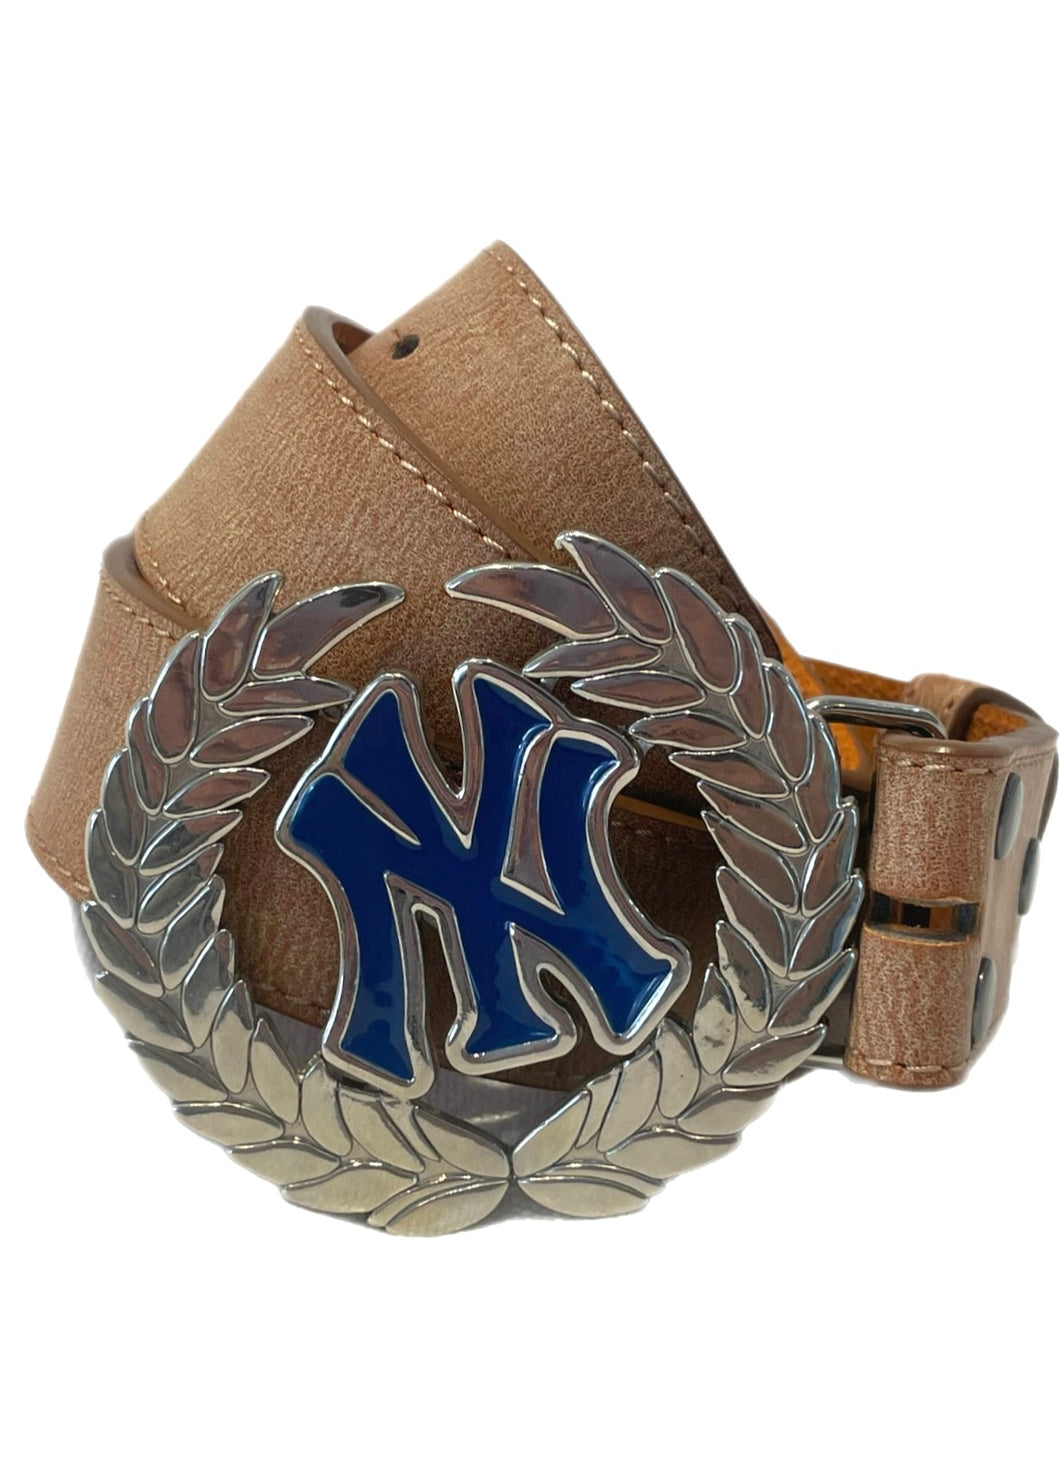 New York Yankees, MLB Vintage Belt Buckle with New Soft Leather Strap